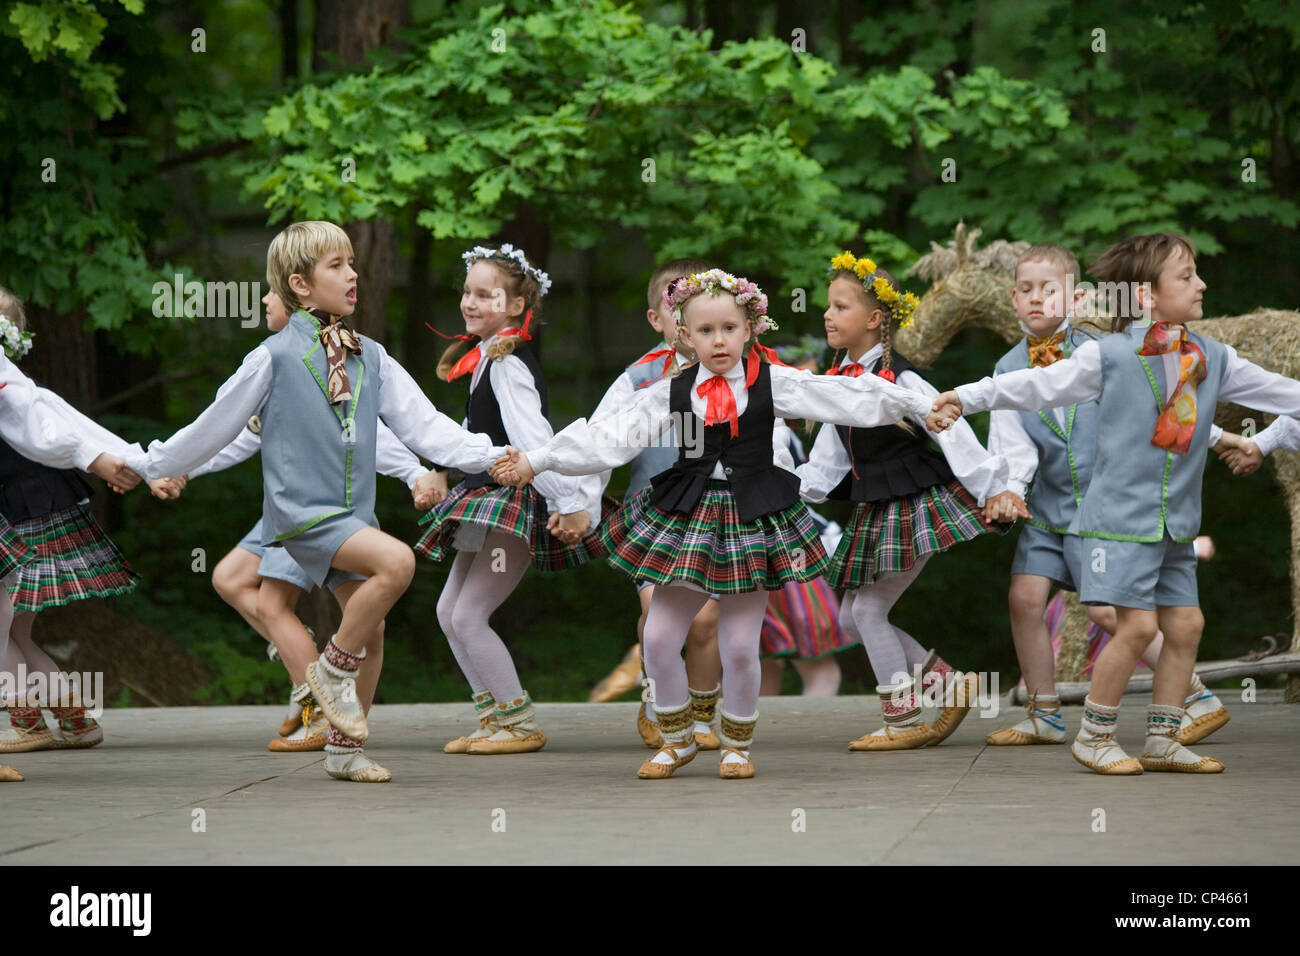 Latvia - Folk festival. Children in traditional costume as they perform a folk dance Stock Photo